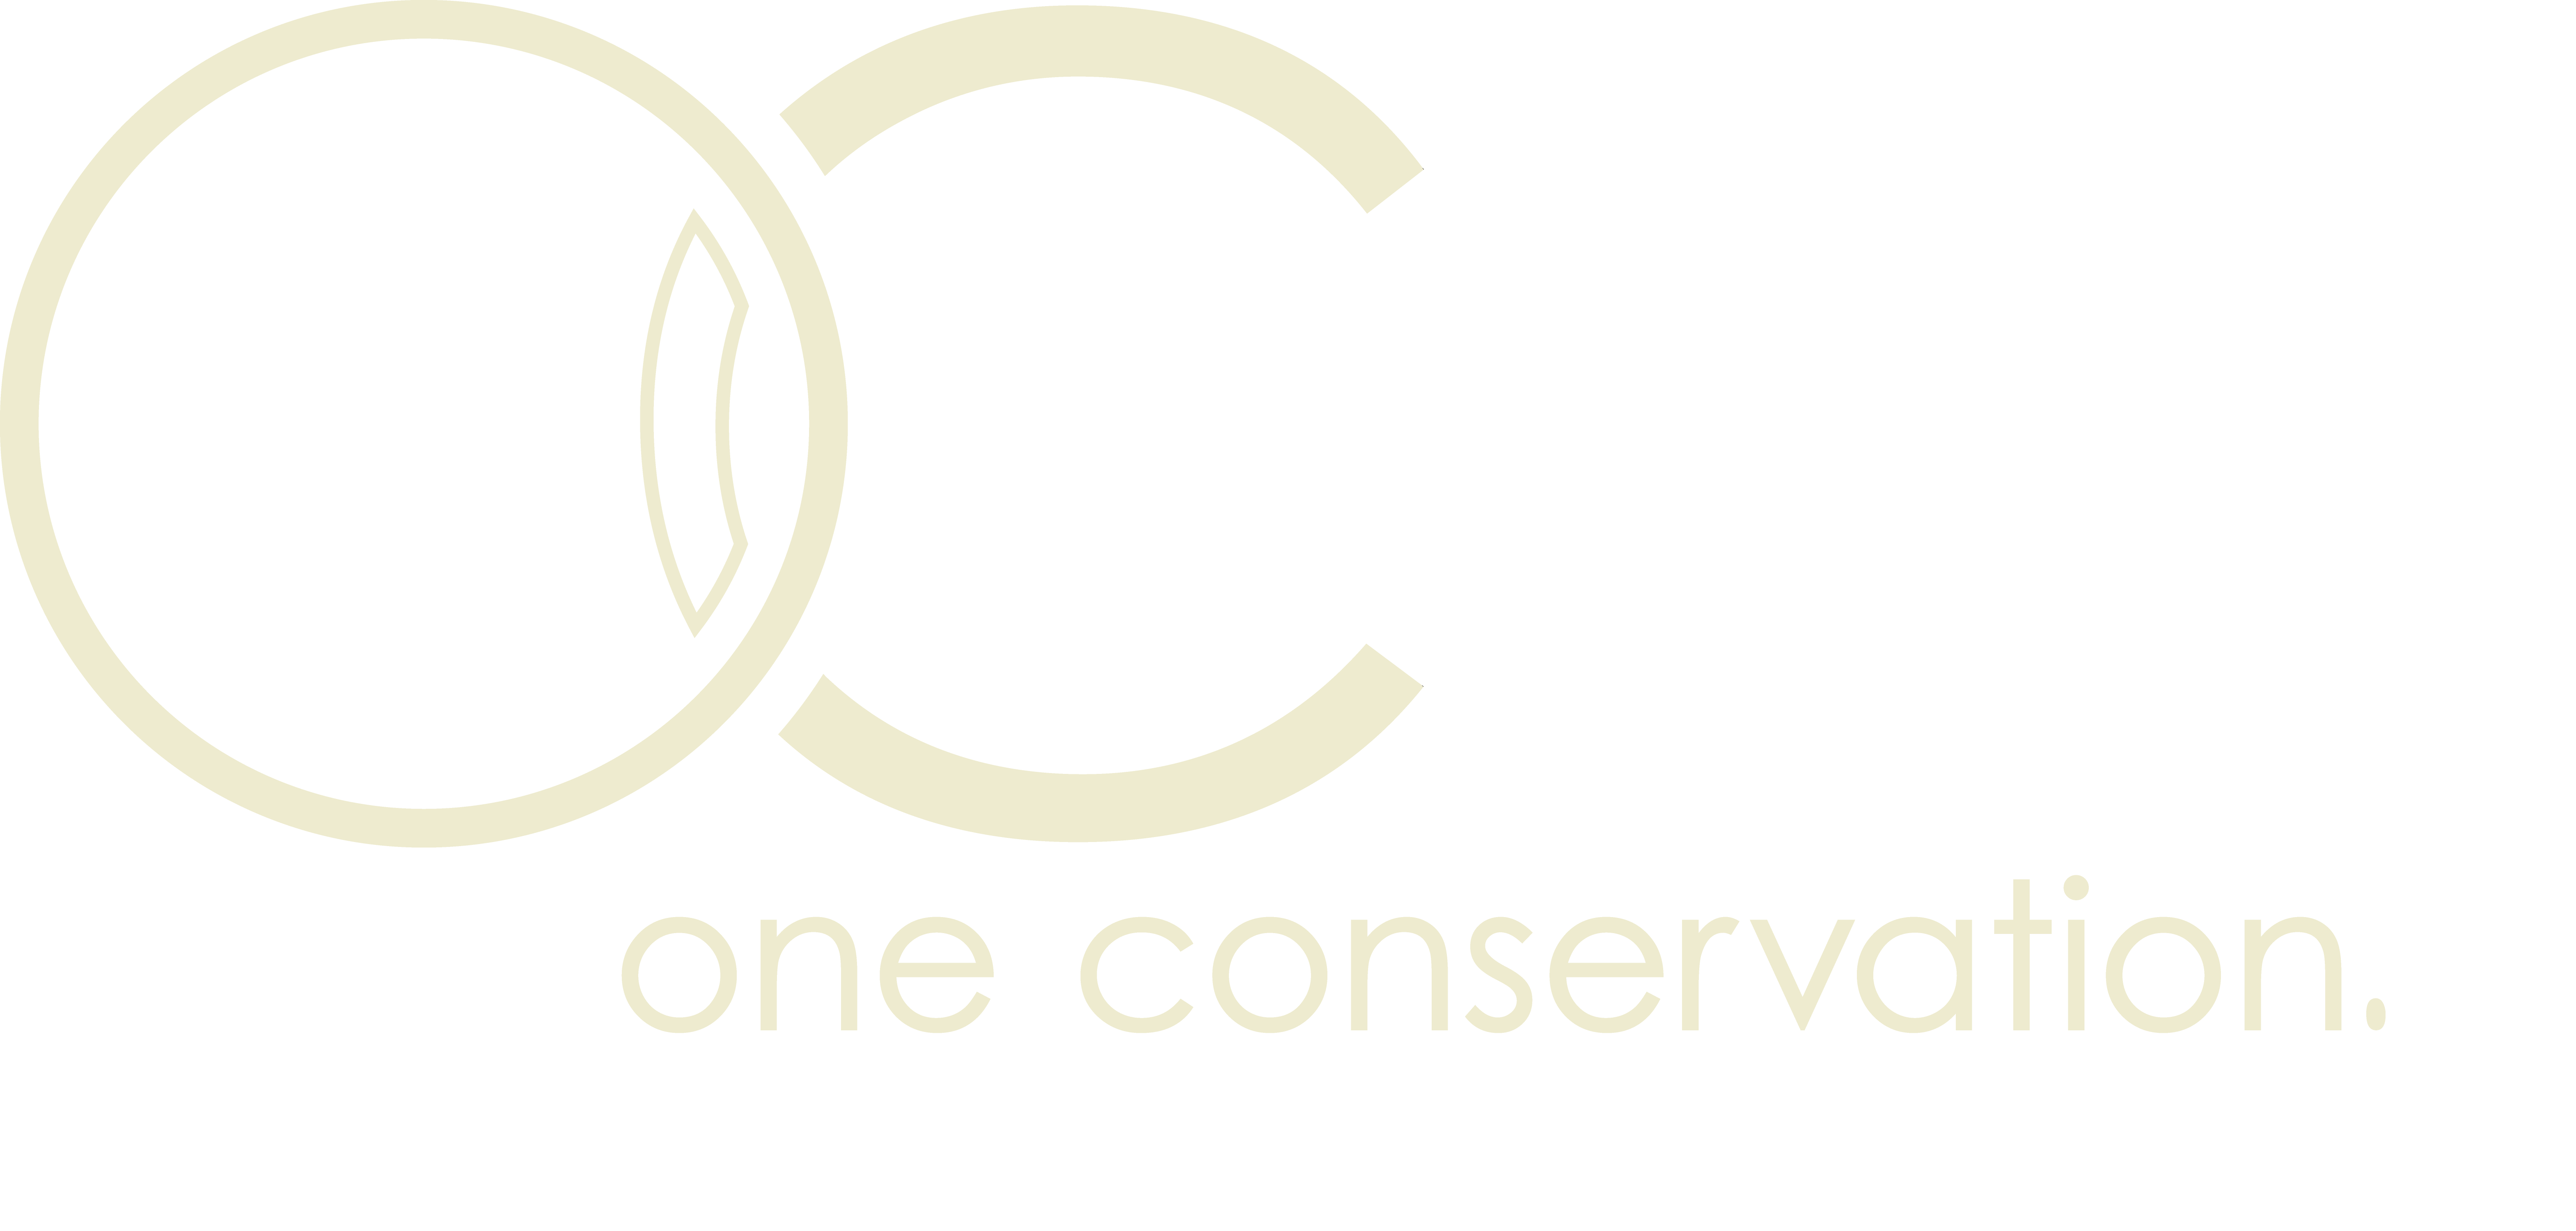 One Conservation